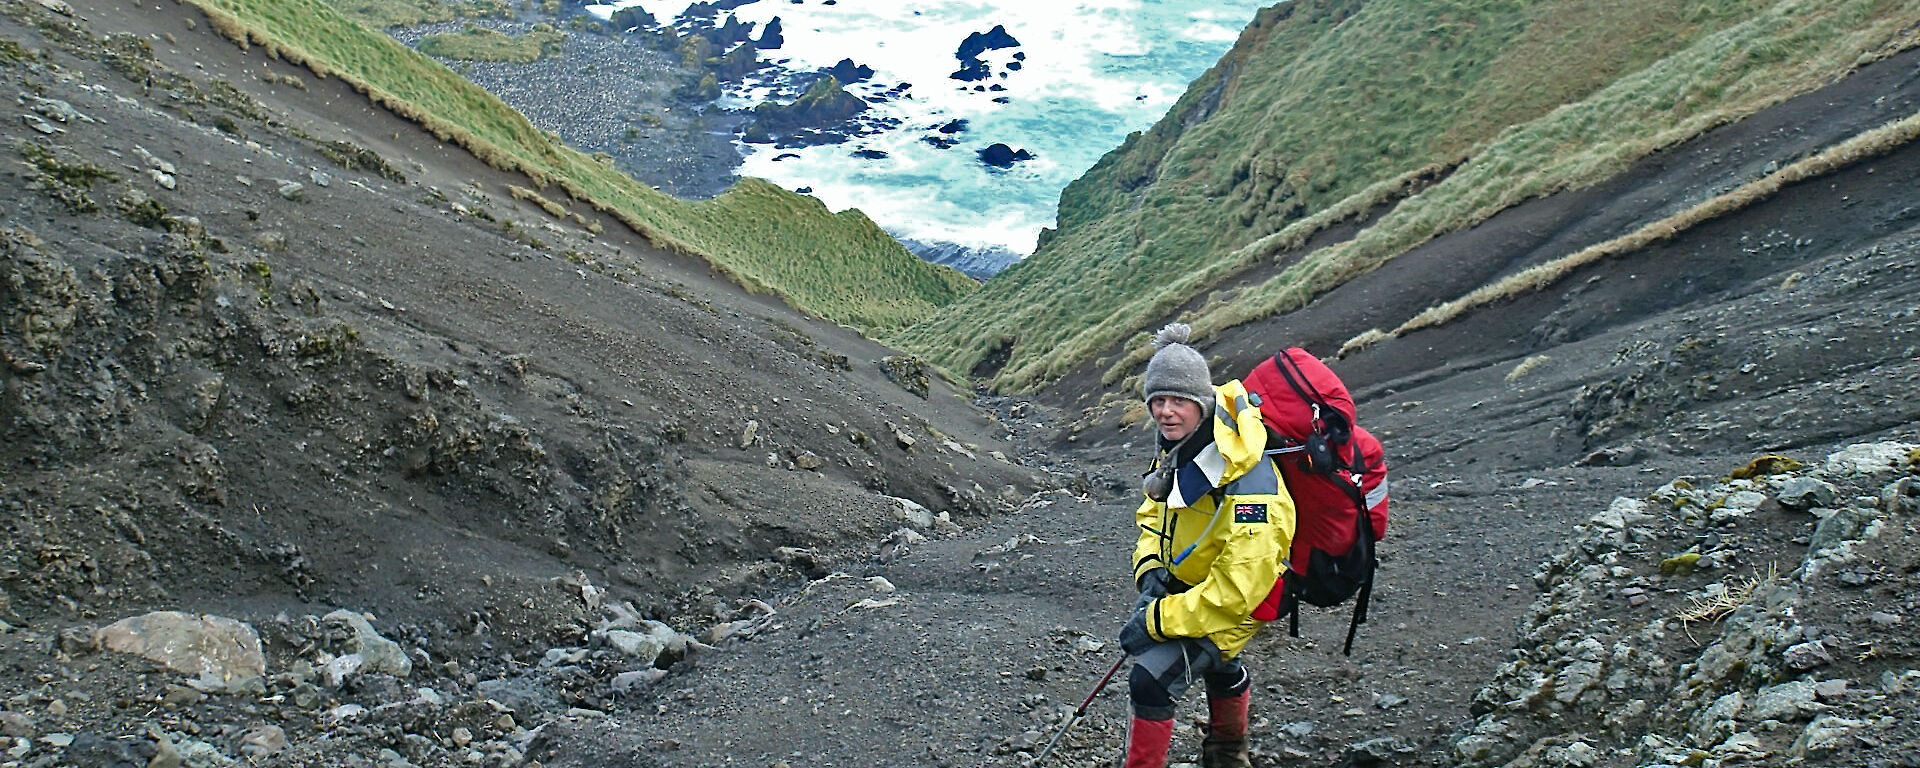 Expeditioner on a steep slope covered in soil but flanked by moss, looks back at the camera with the ocean and rocks behind him